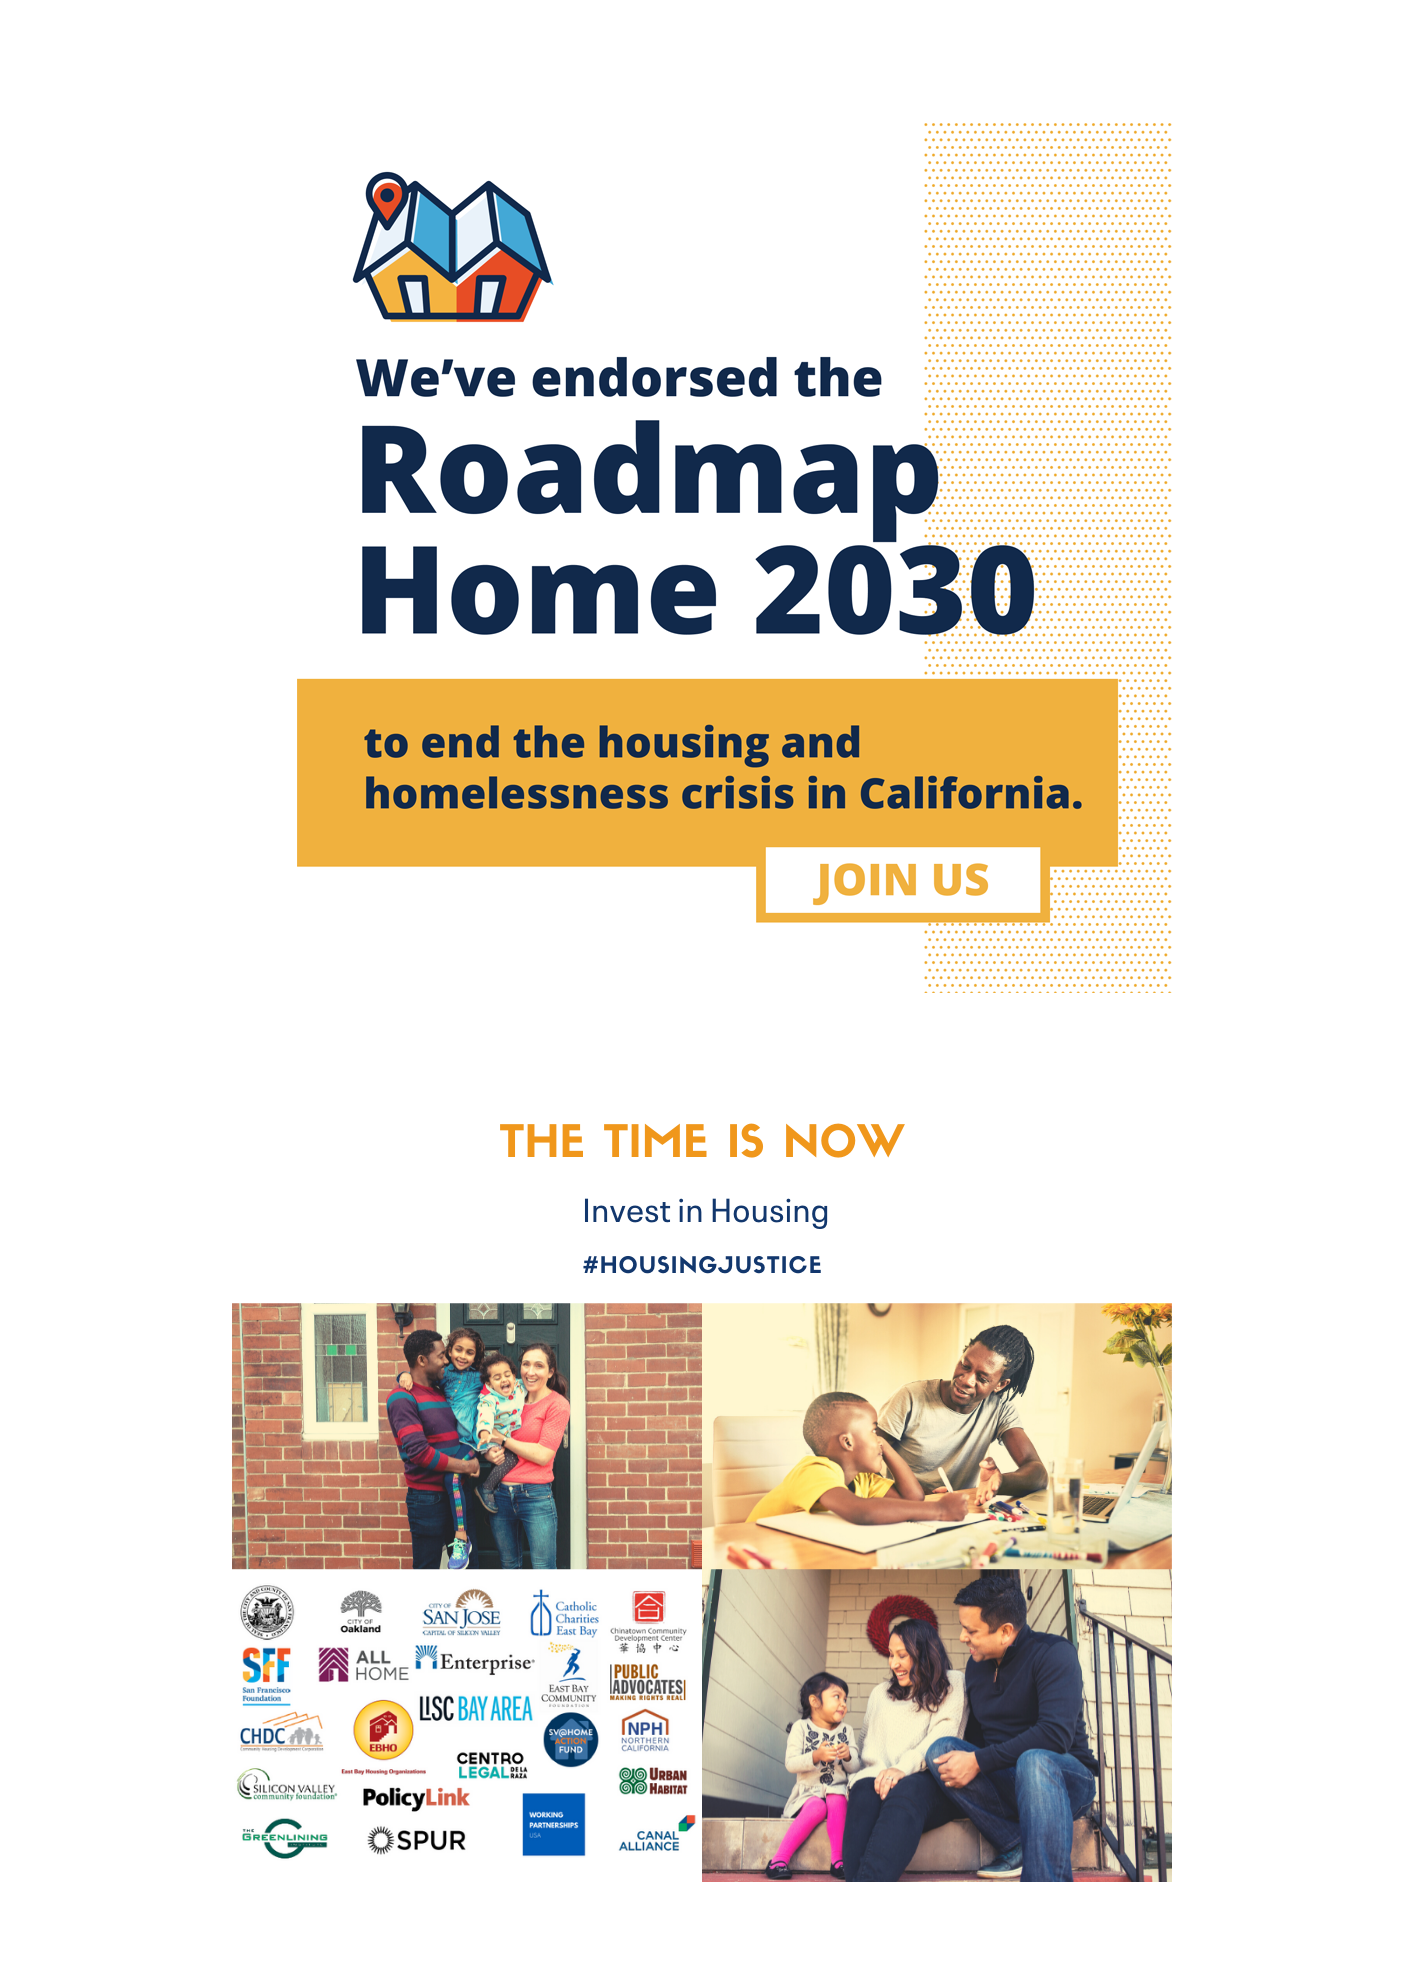 Image of two initiatives, Roadmap Home 2030 and Priorities letter, in one image.